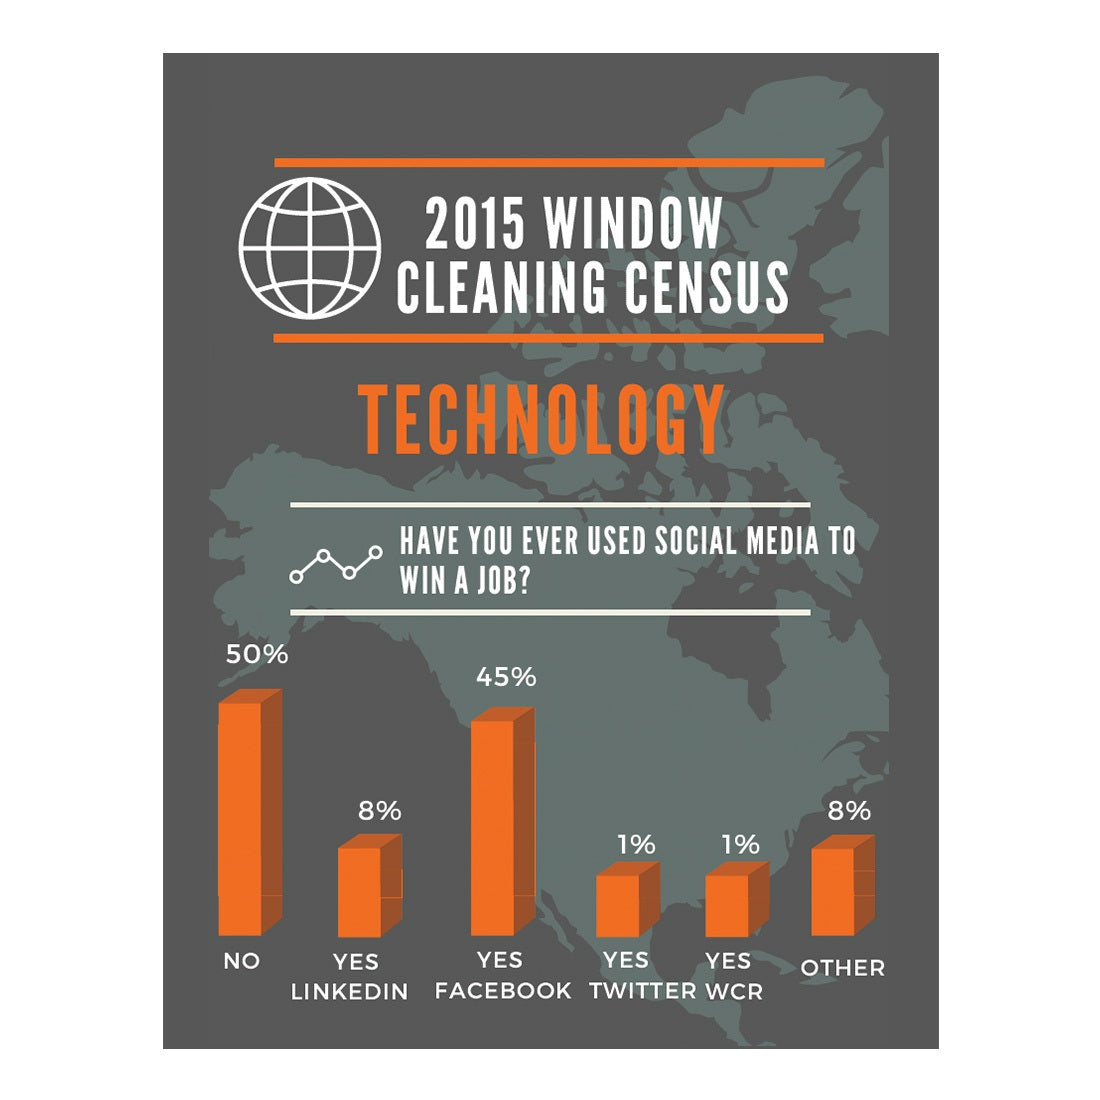 2015 Window Cleaning Census Technology